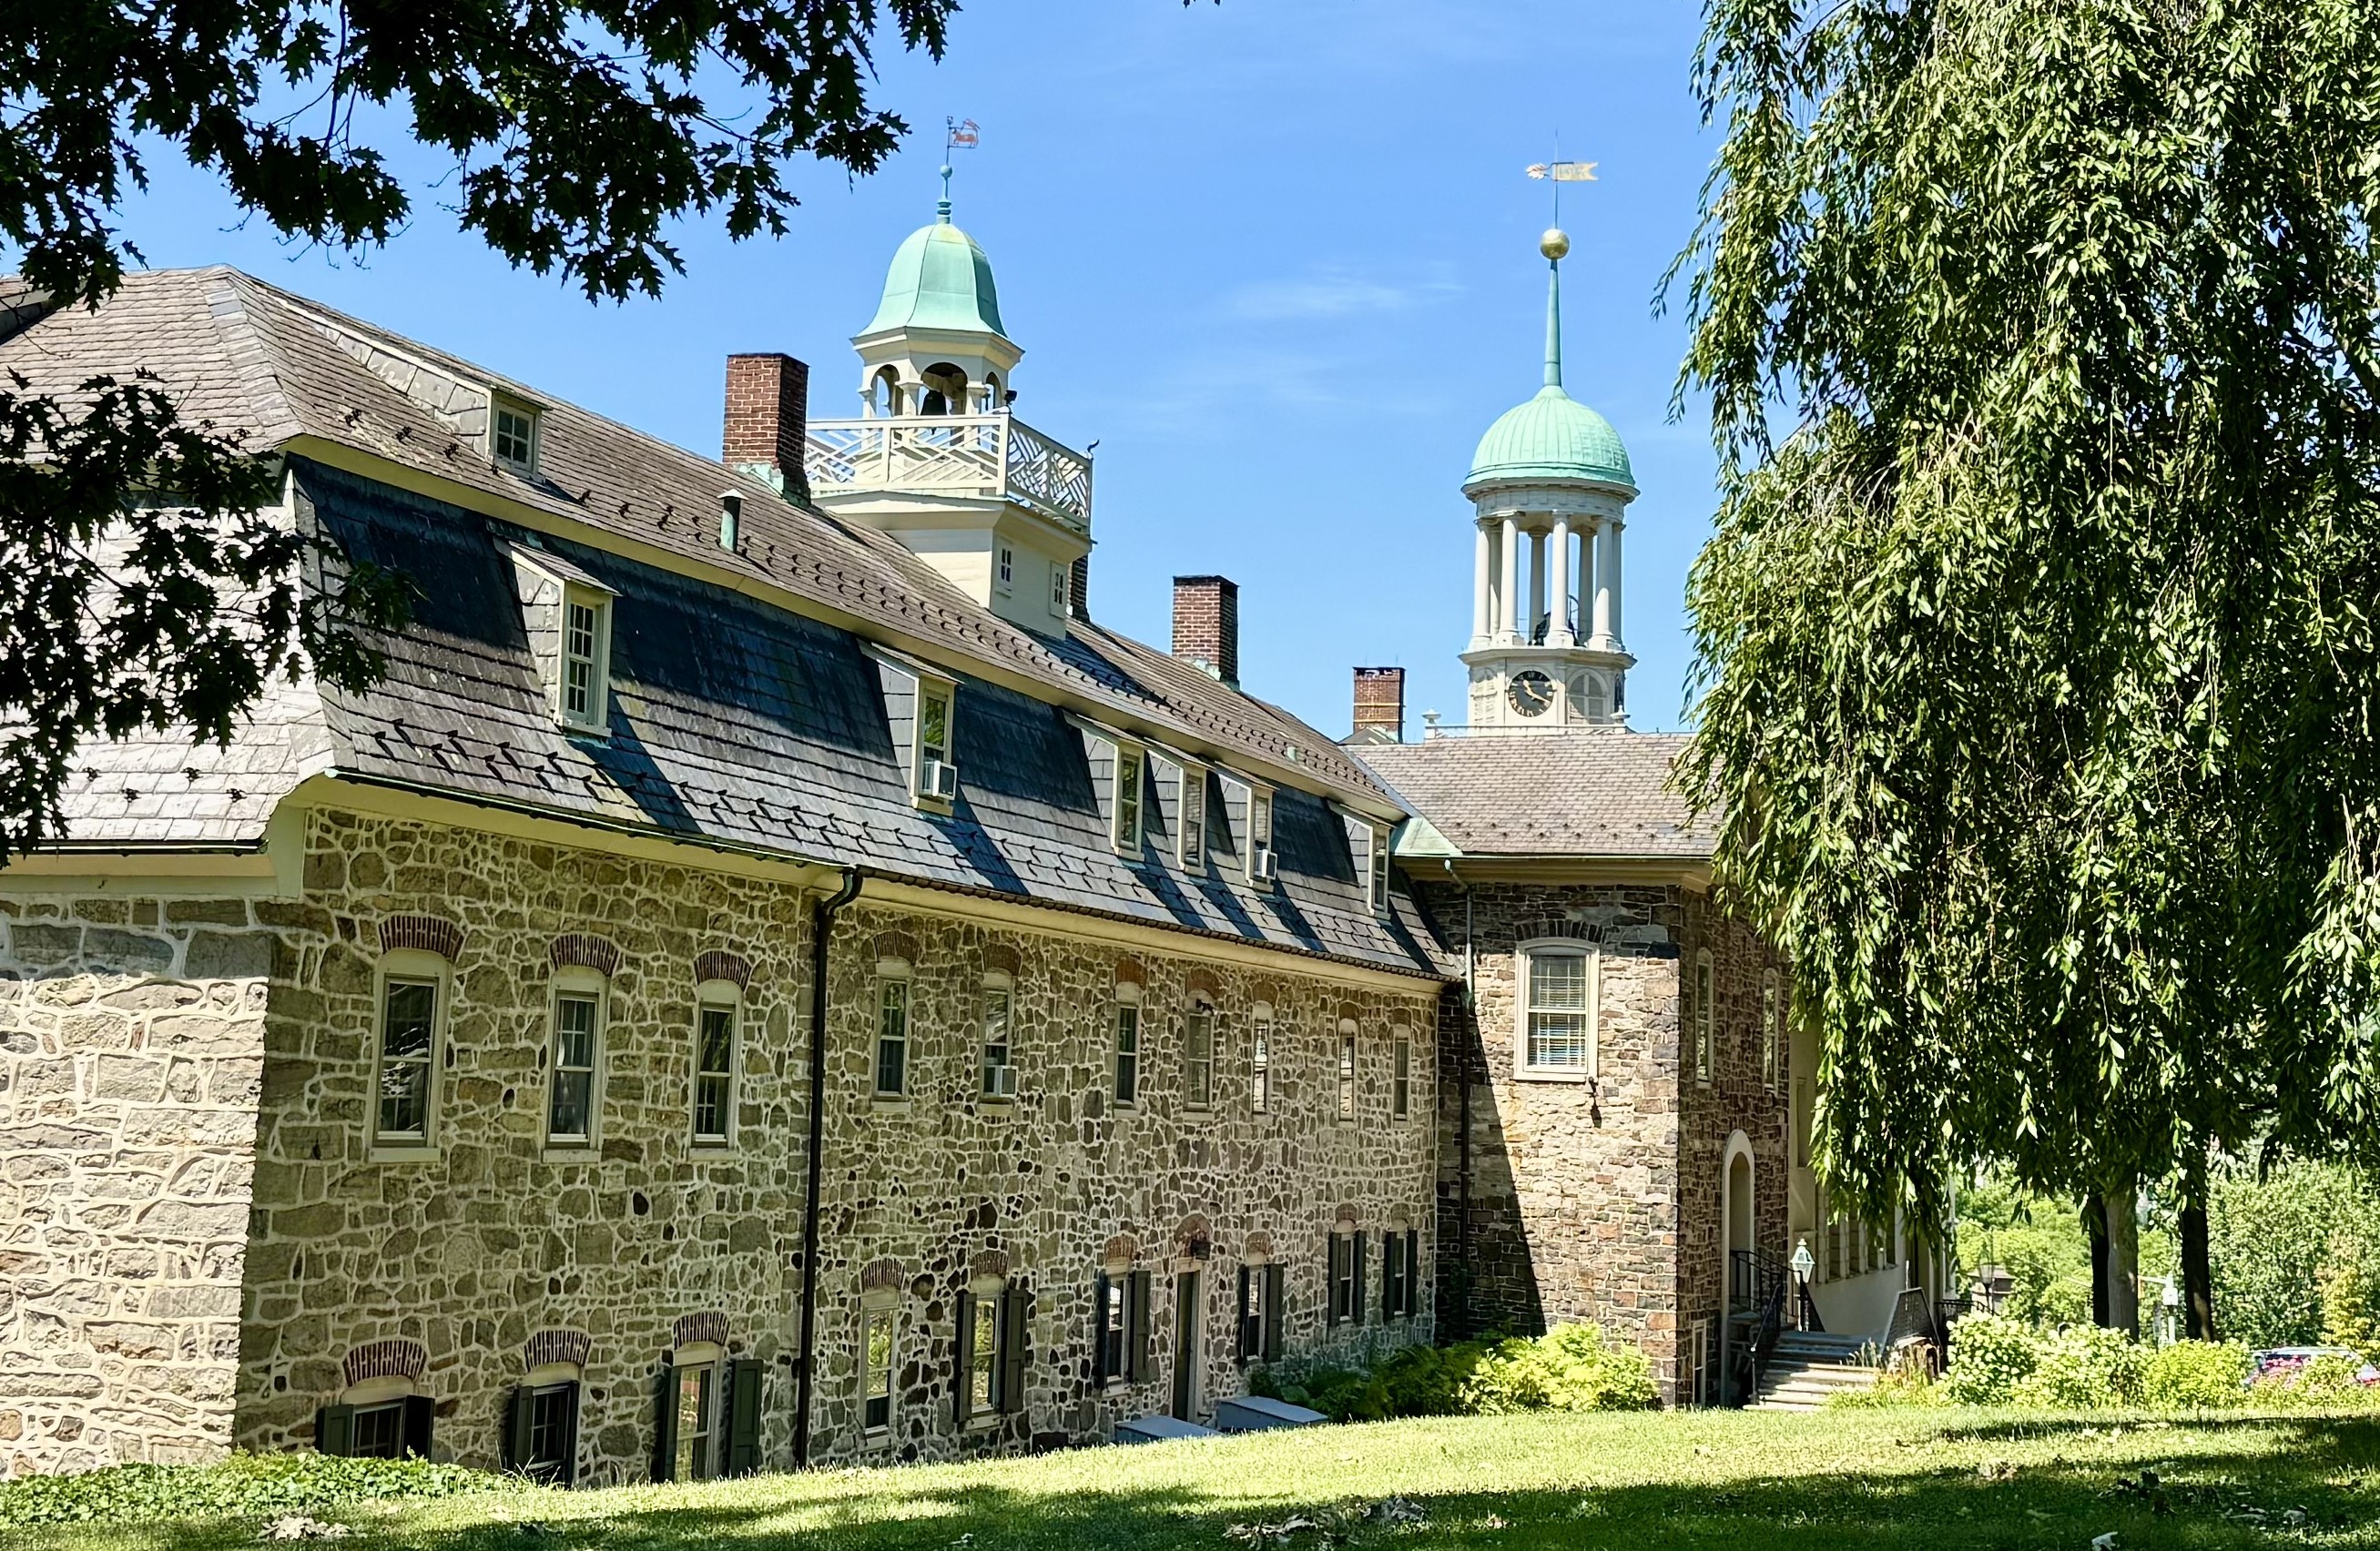 To the left, a stone building stands with multiple windows and a belfry; on the right is a large tree.